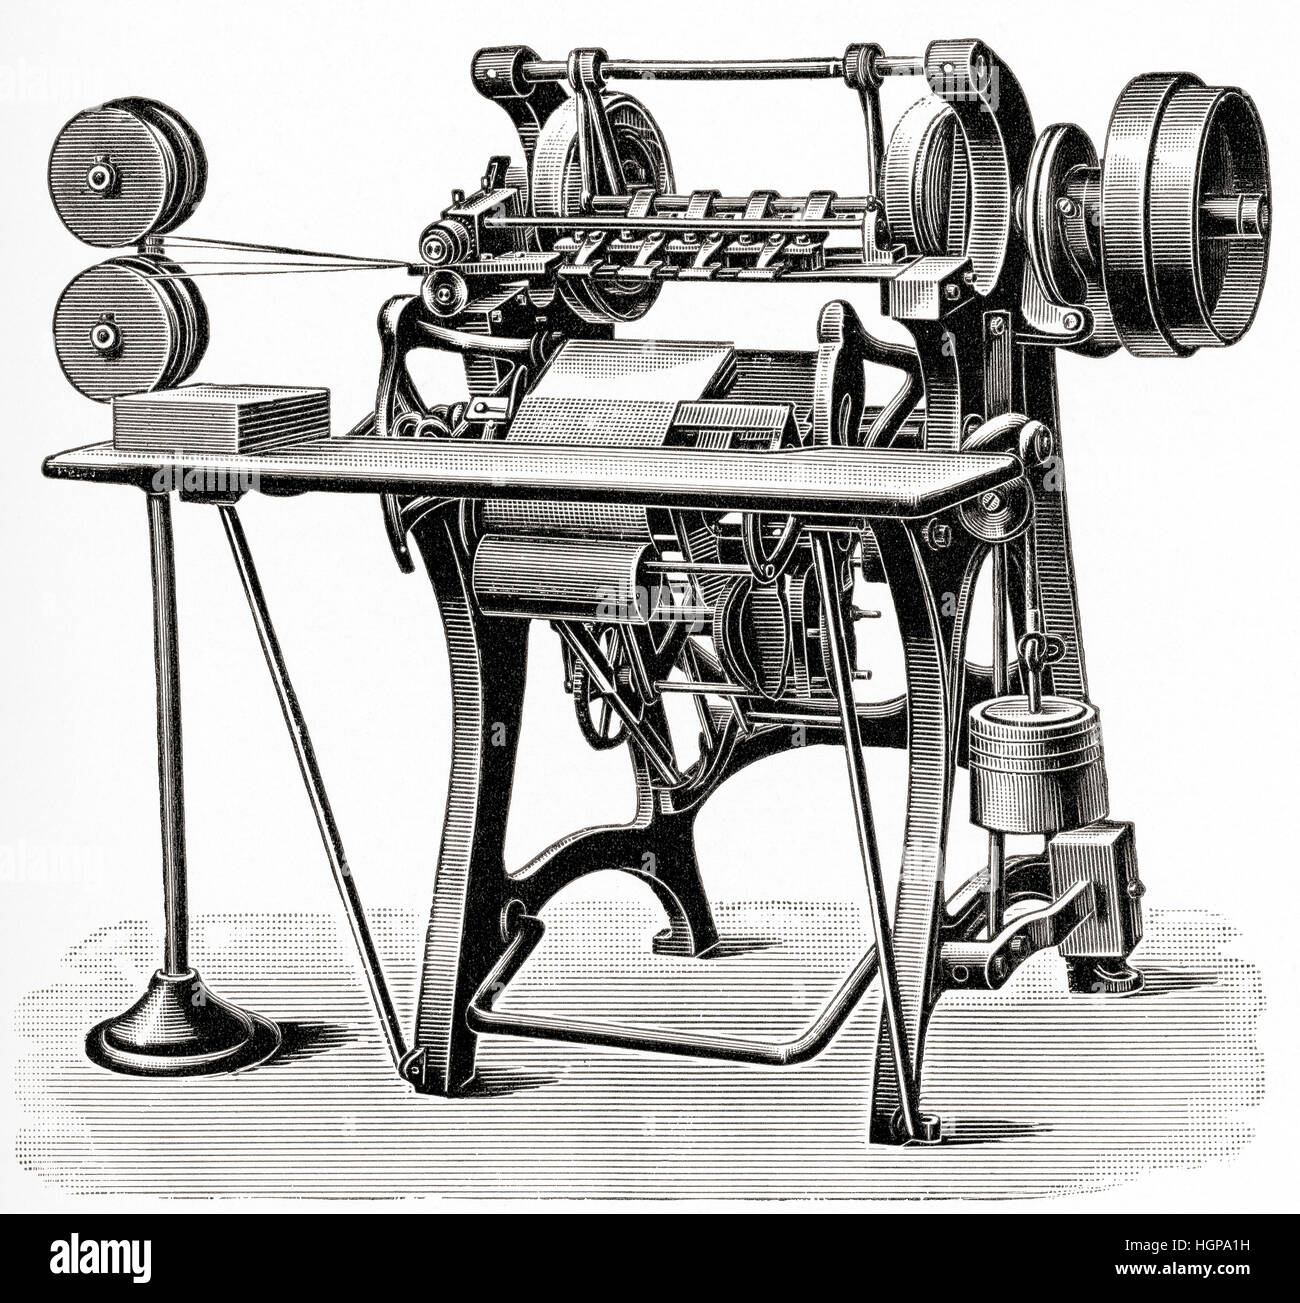 An early bookbinding machine that stitched books from a coil of wire.  From Meyers Lexicon, published 1924. Stock Photo